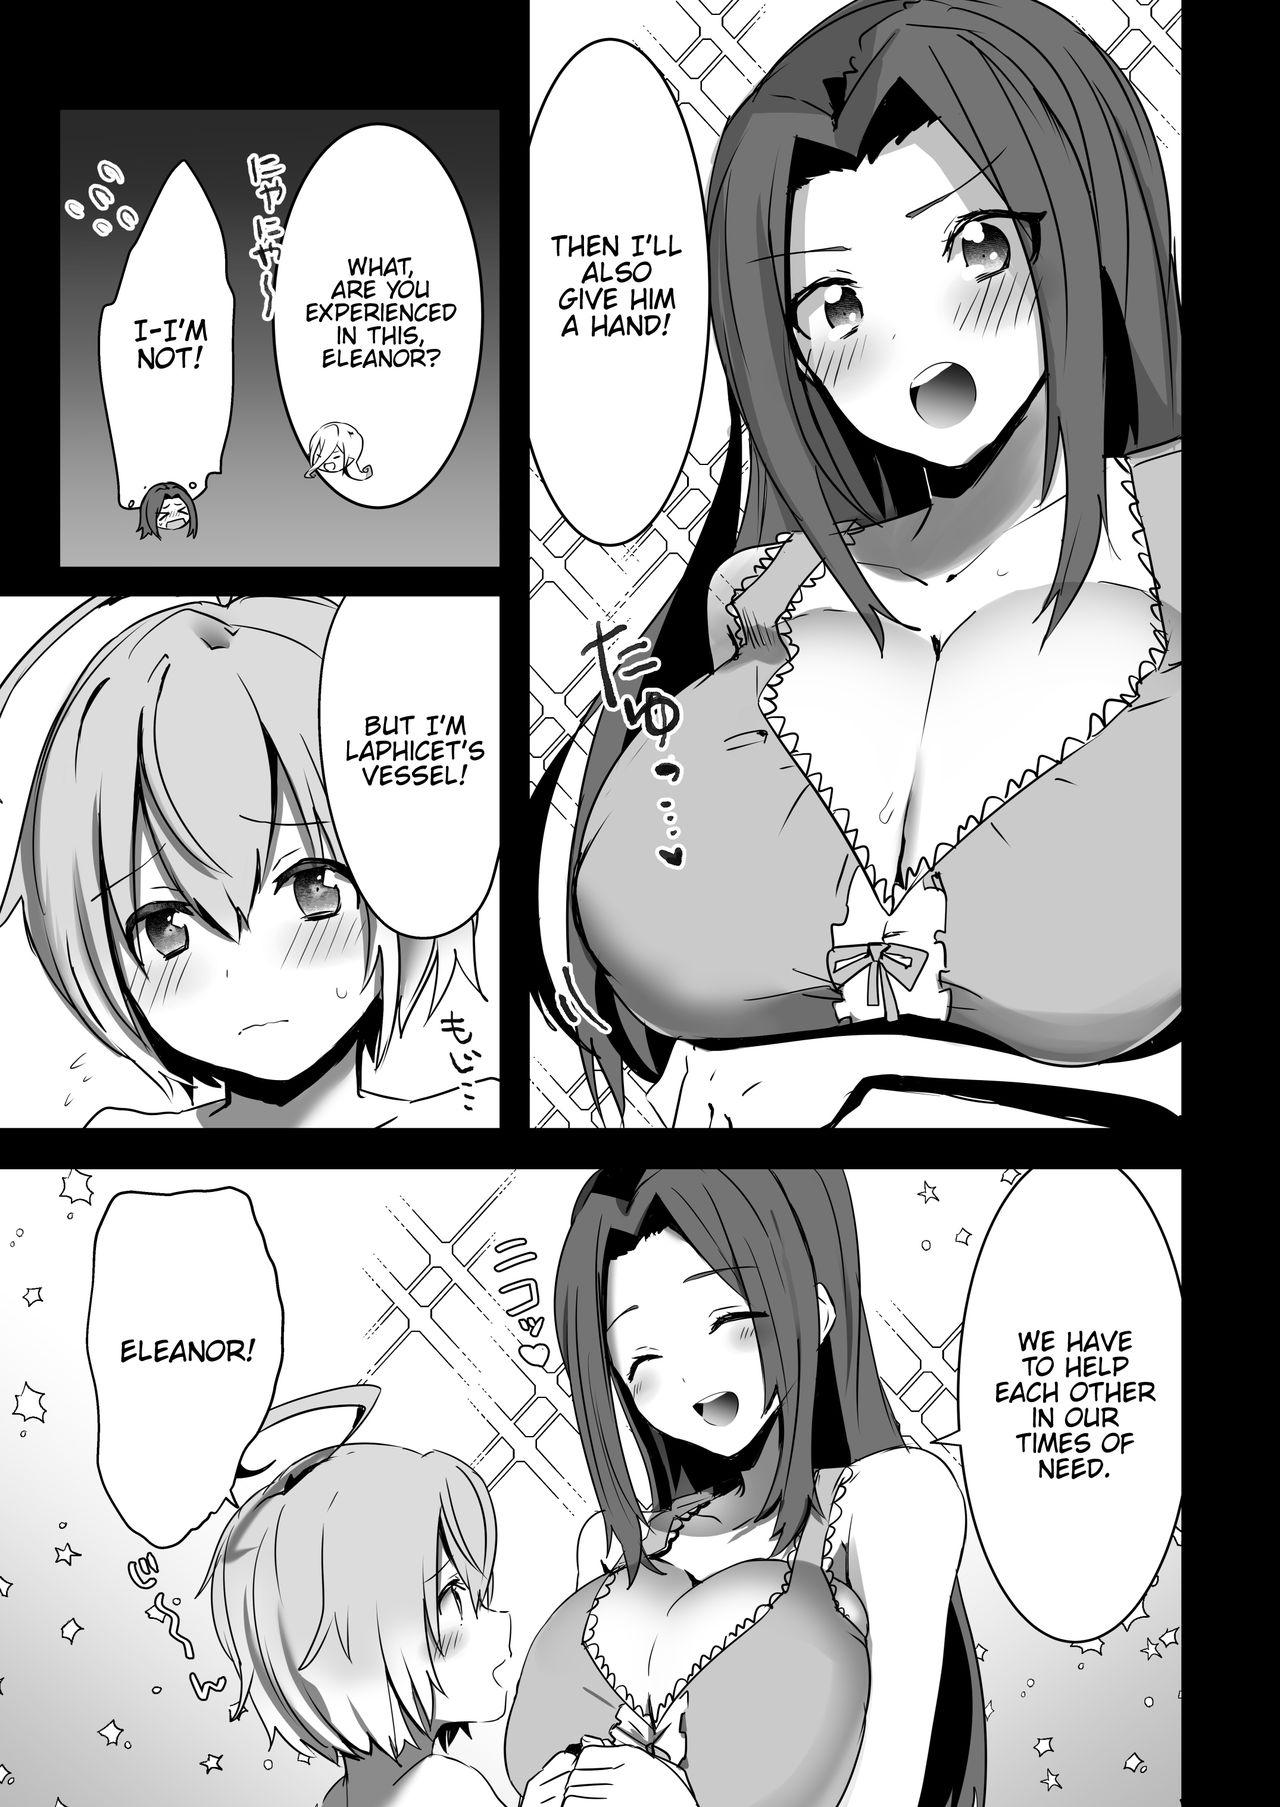 Stepmom Laphicet Tsumamigui - Tales of berseria Best Blowjob - Page 7